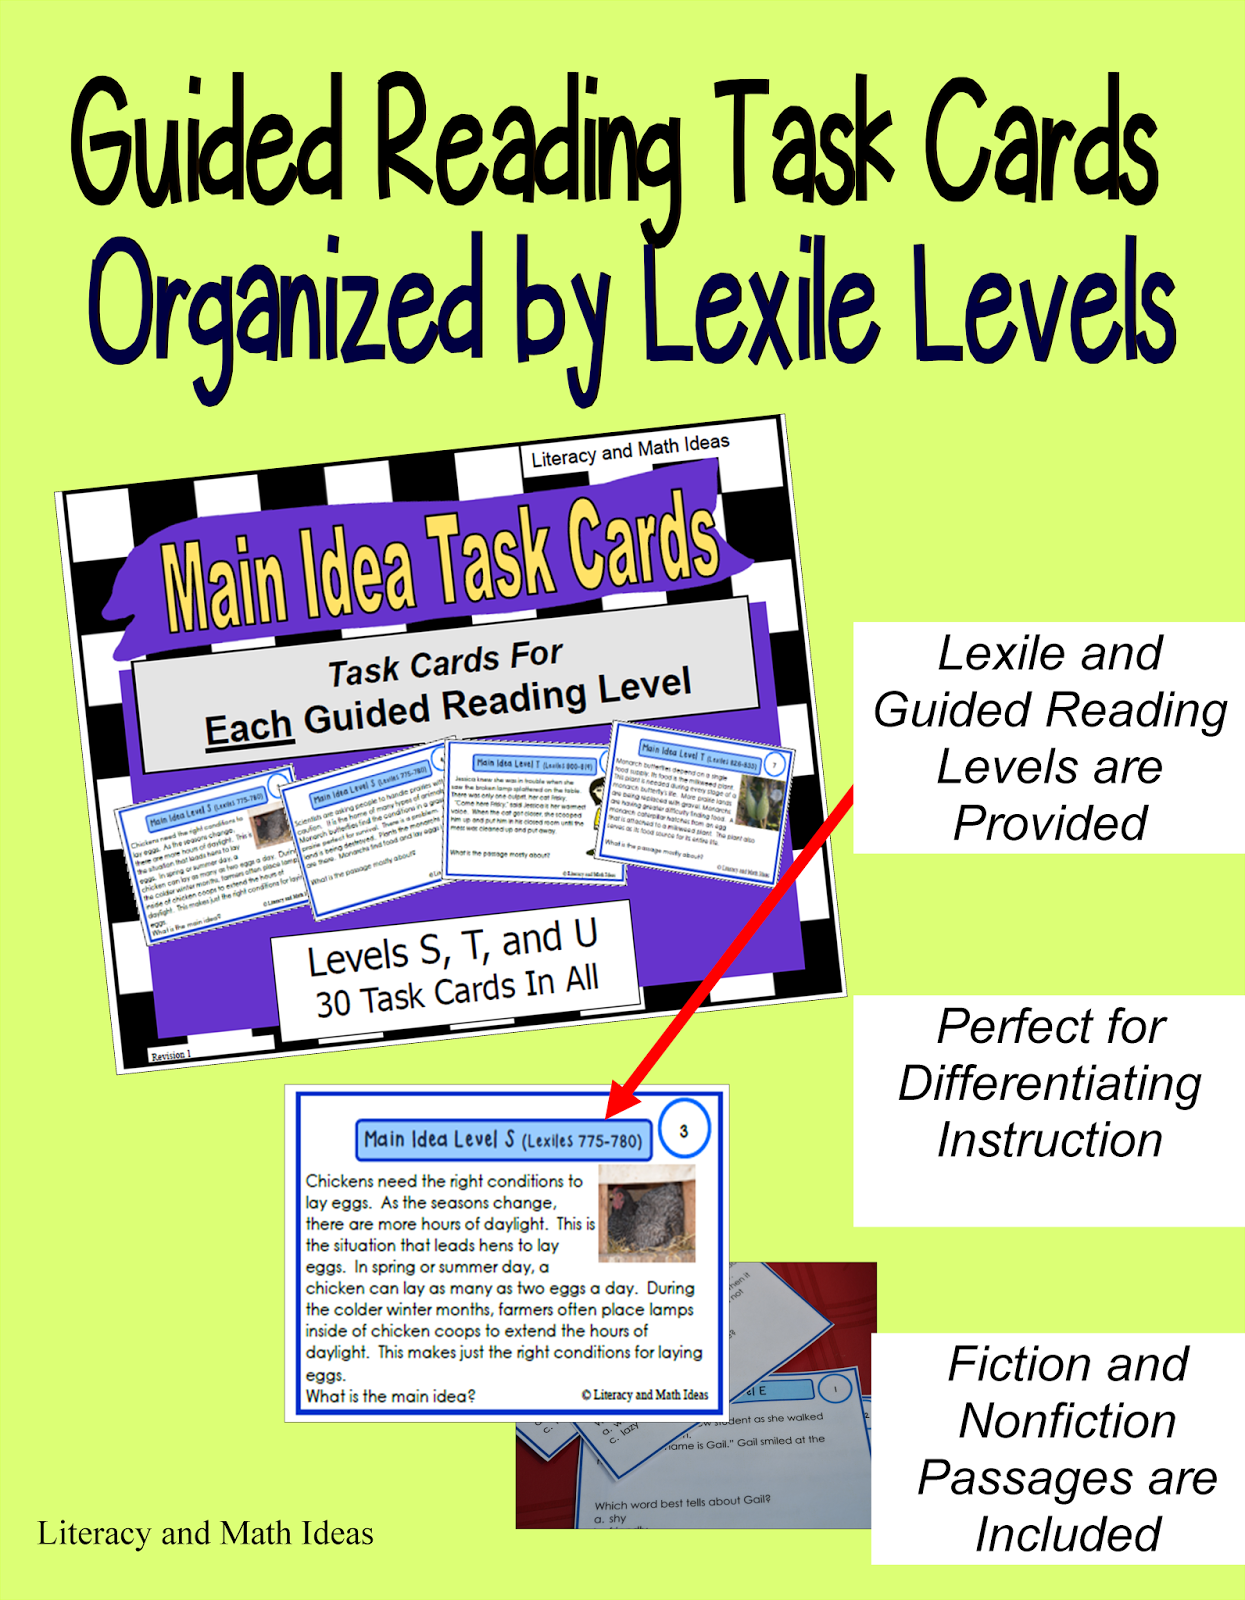 lexile level compared to guided reading level